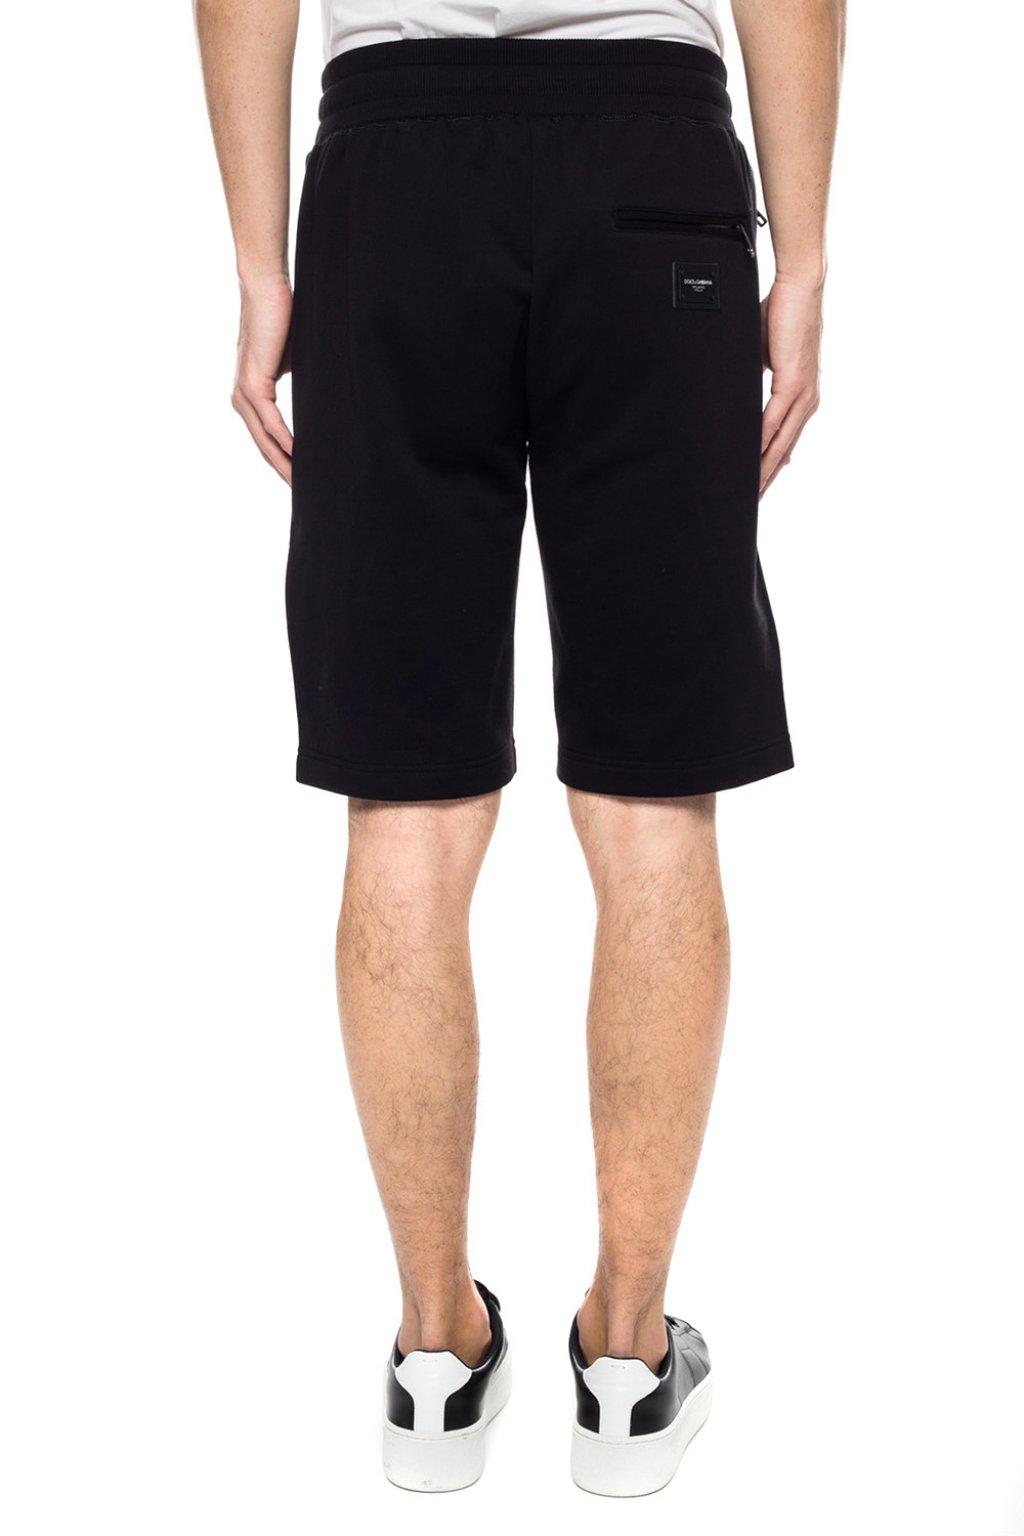 Dolce & Gabbana Loopback Cotton-jersey Shorts in Black for Men - Save